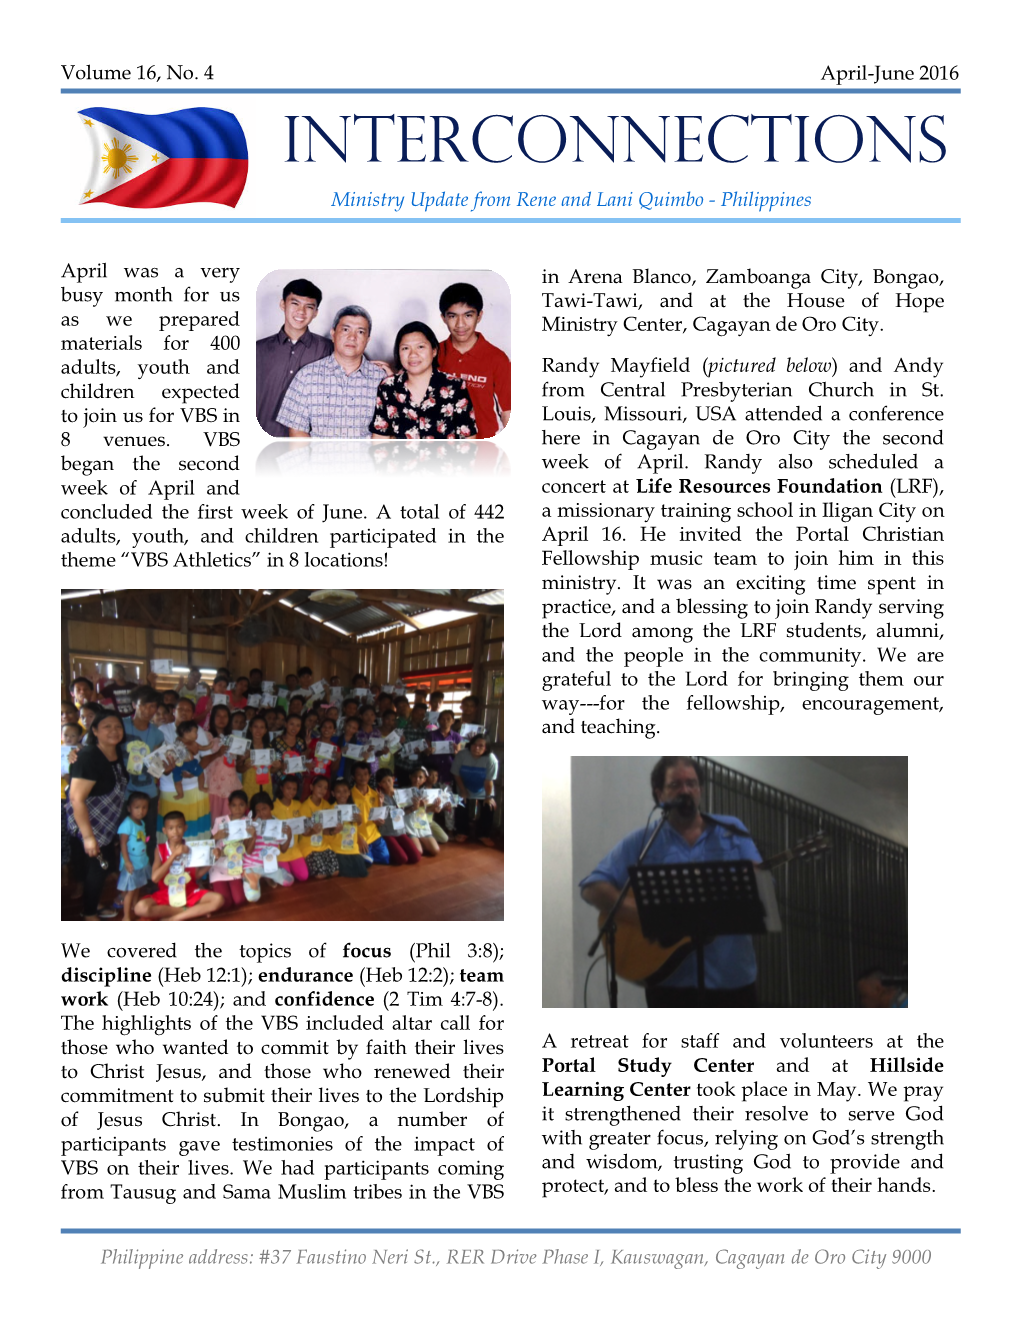 INTERCONNECTIONS Ministry Update from Rene and Lani Quimbo - Philippines